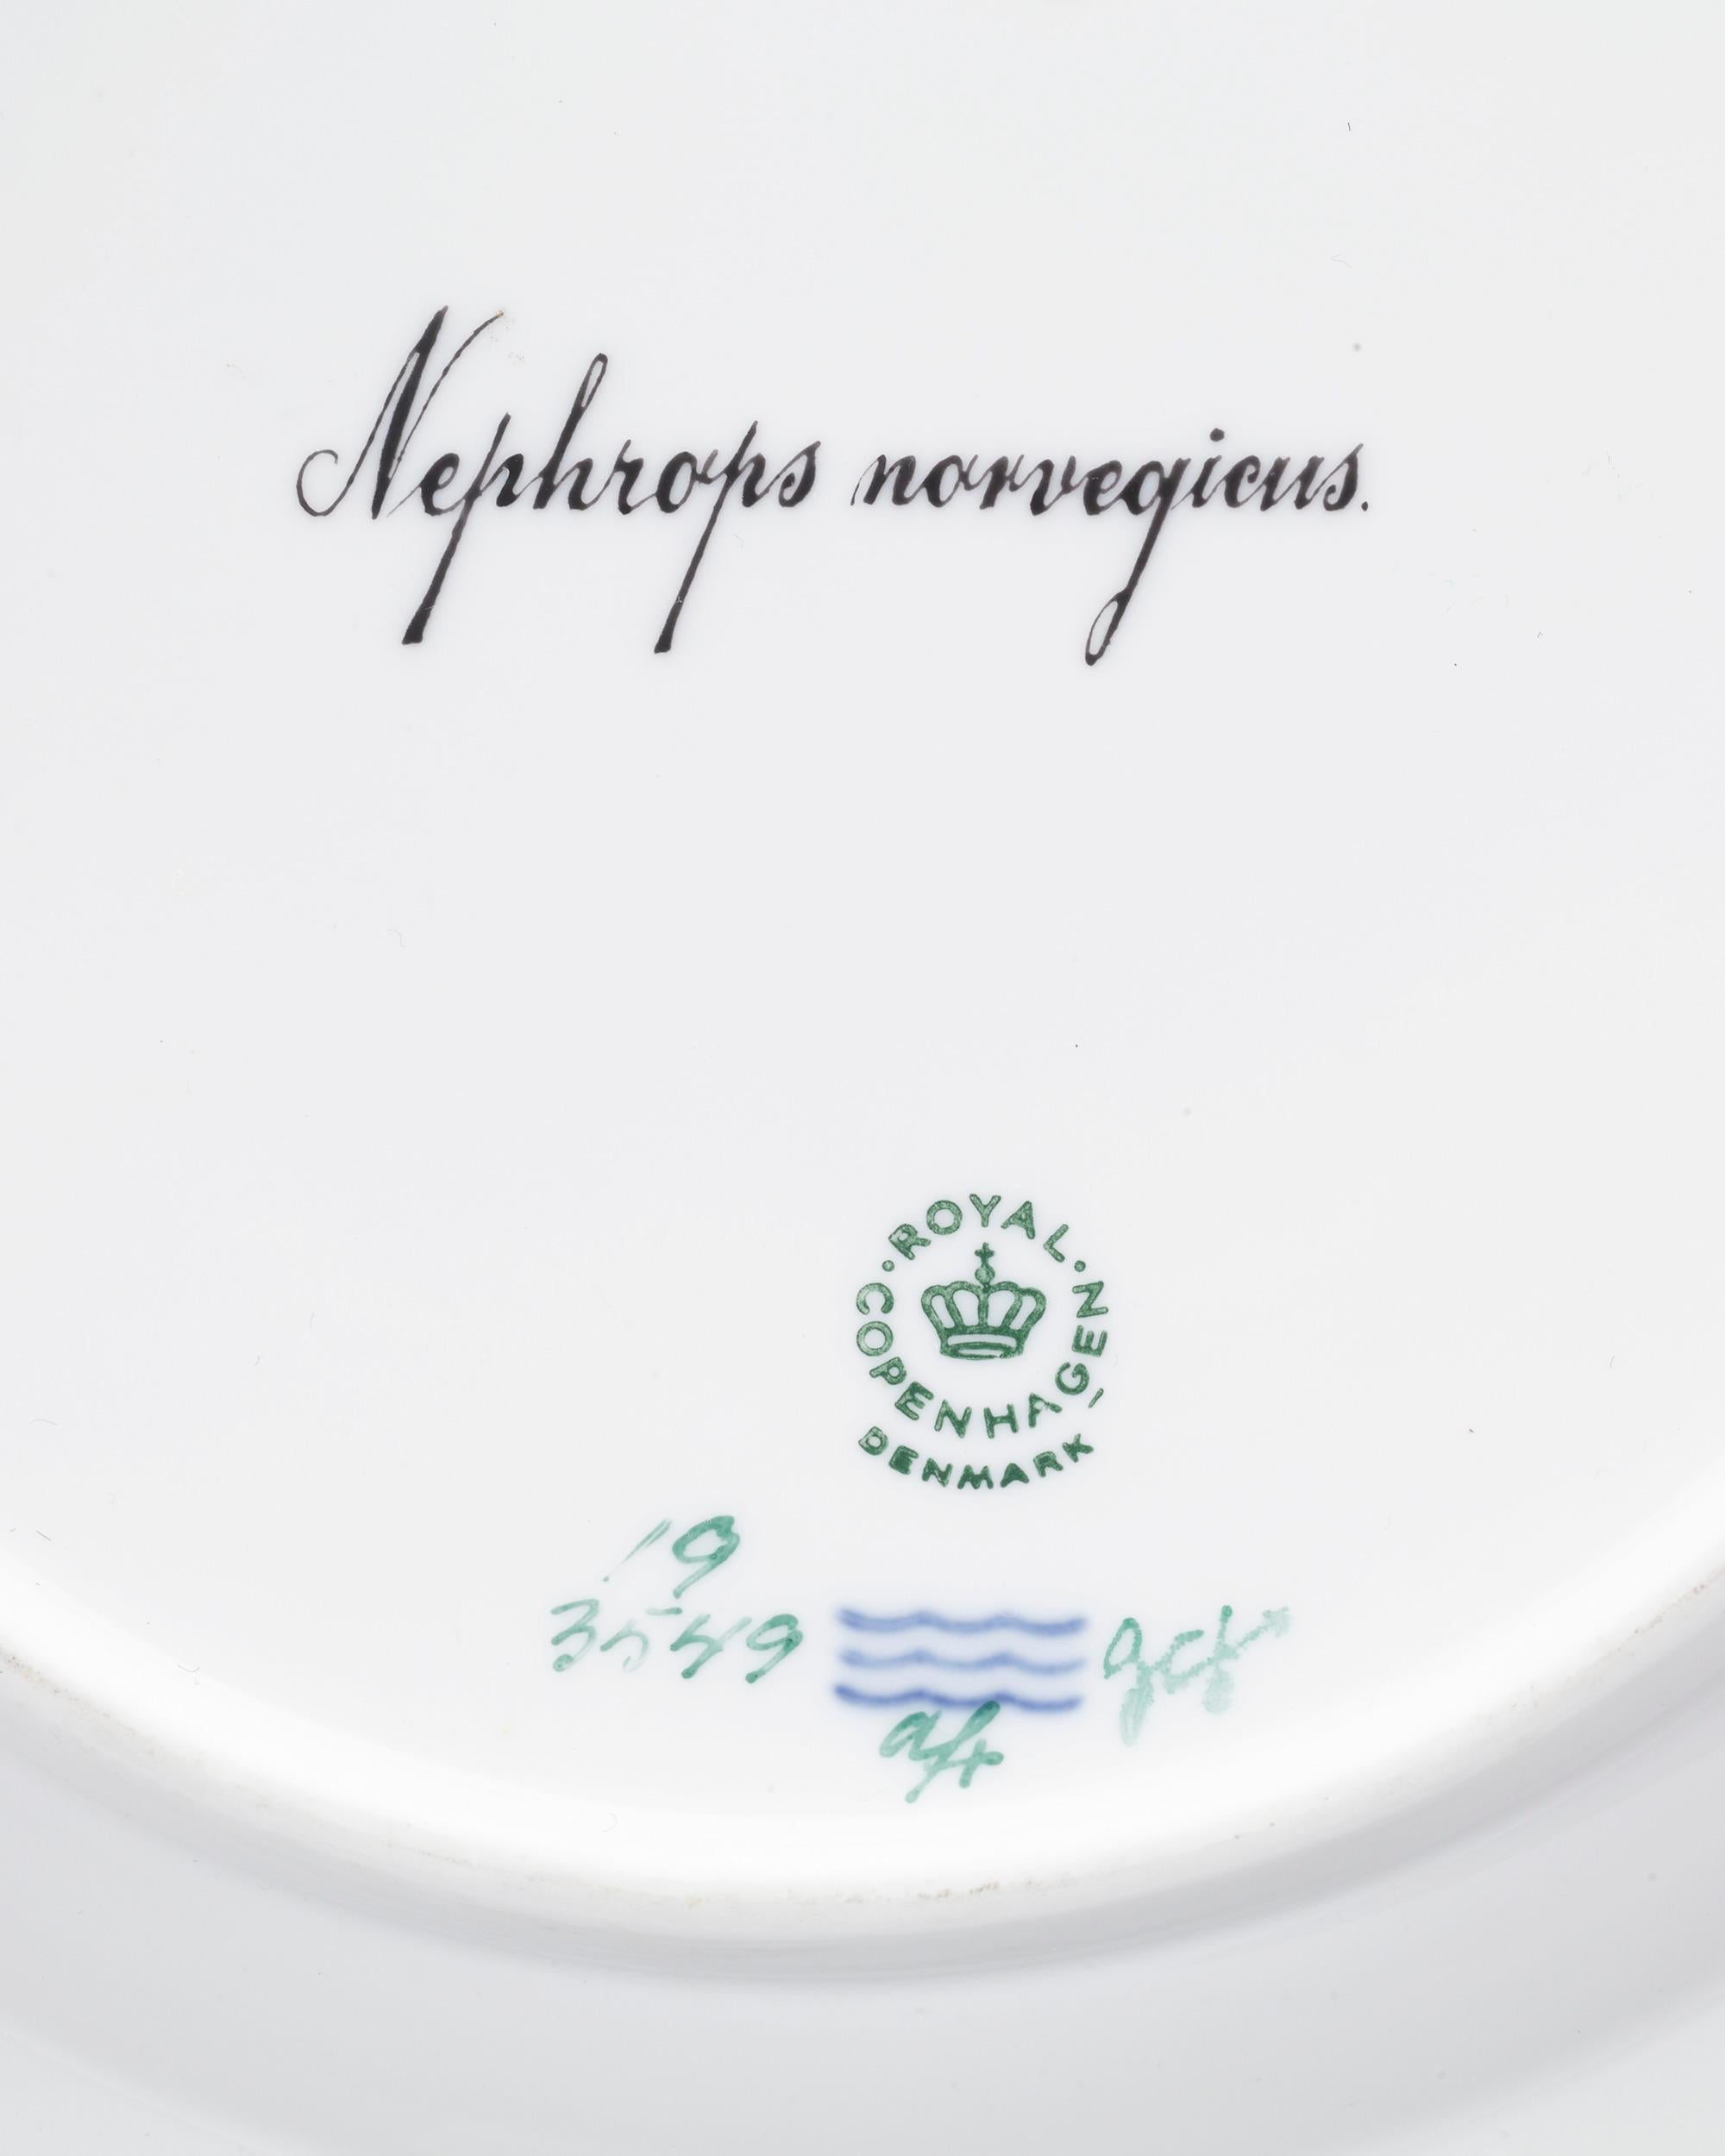 This hand-painted porcelain plate by Royal Copenhagen is adorned by the firm's highly regarded Flora Danica pattern. While the majority of the motifs in the Flora Danica pattern capture the native fungi and flowers of Denmark, this plate is part of